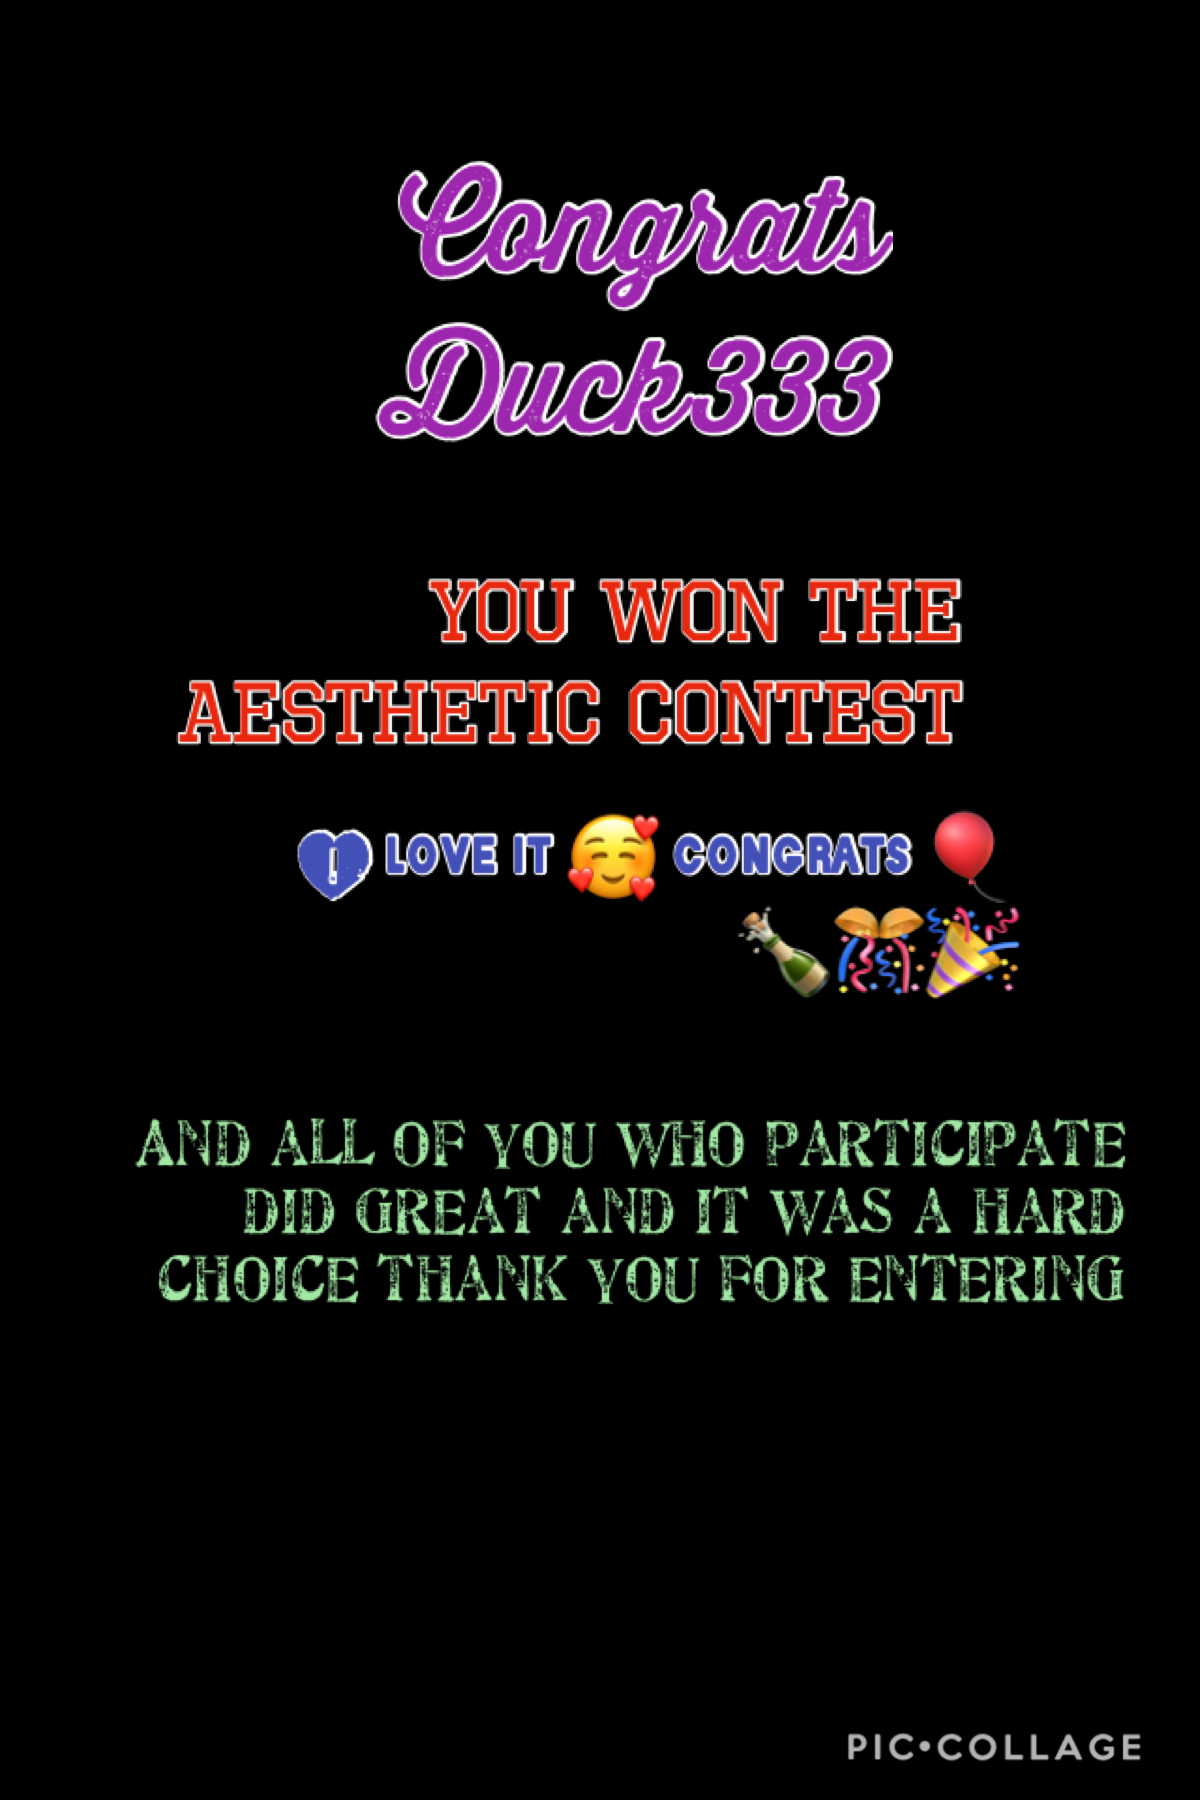 Congrats duck333 and thank you all for participating 